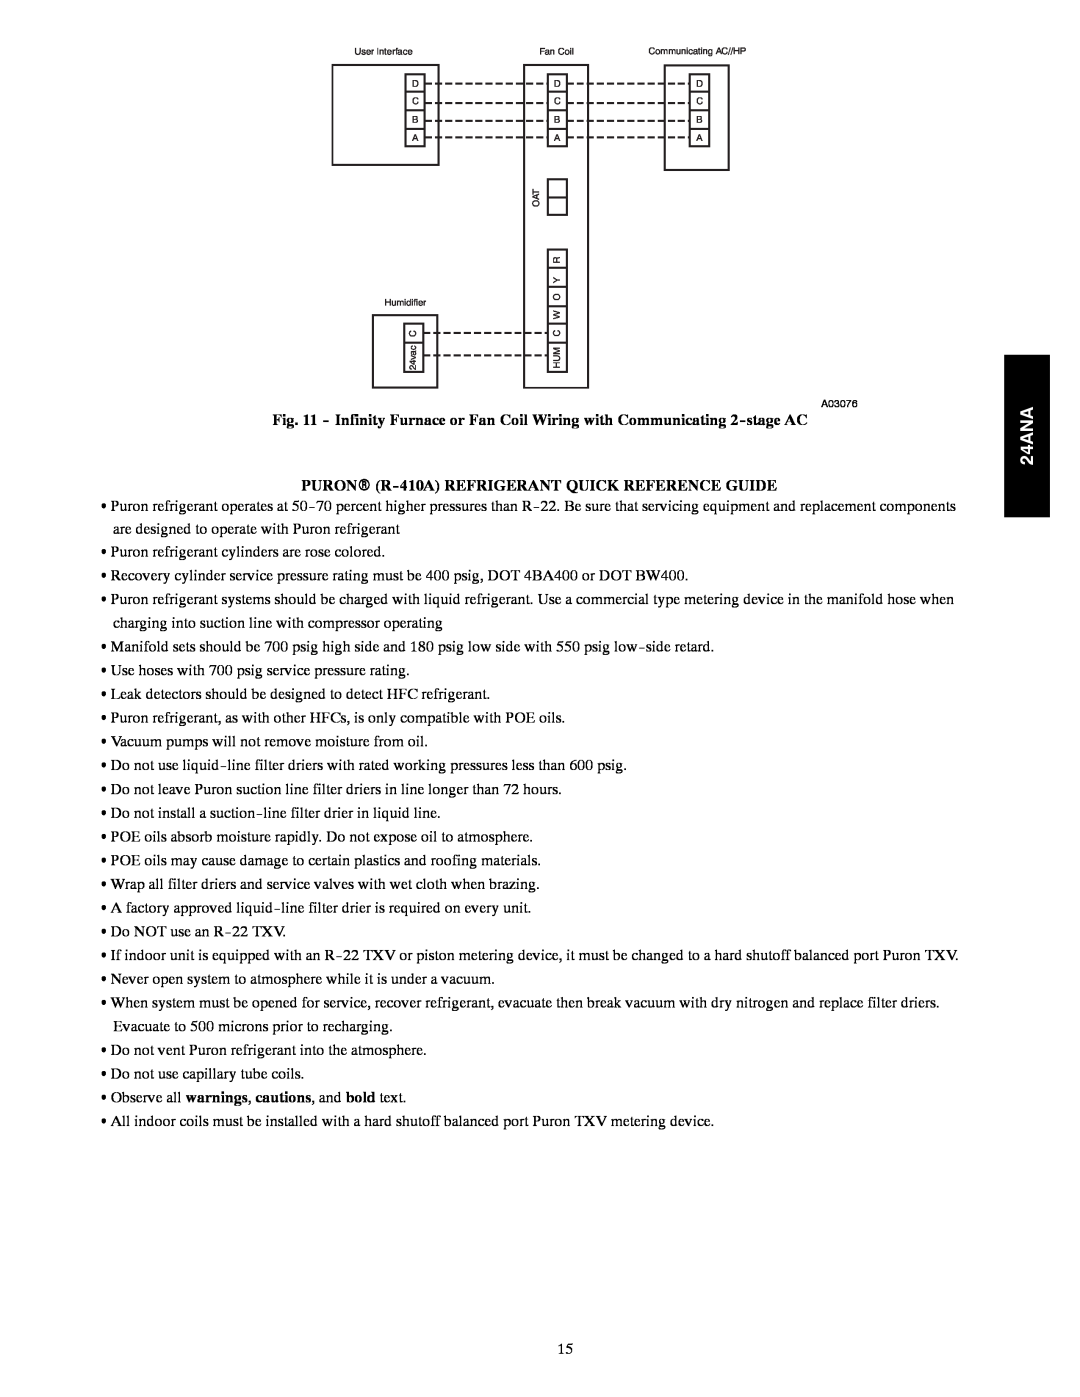 Carrier 24ANA installation instructions PURONR R-410AREFRIGERANT QUICK REFERENCE GUIDE 